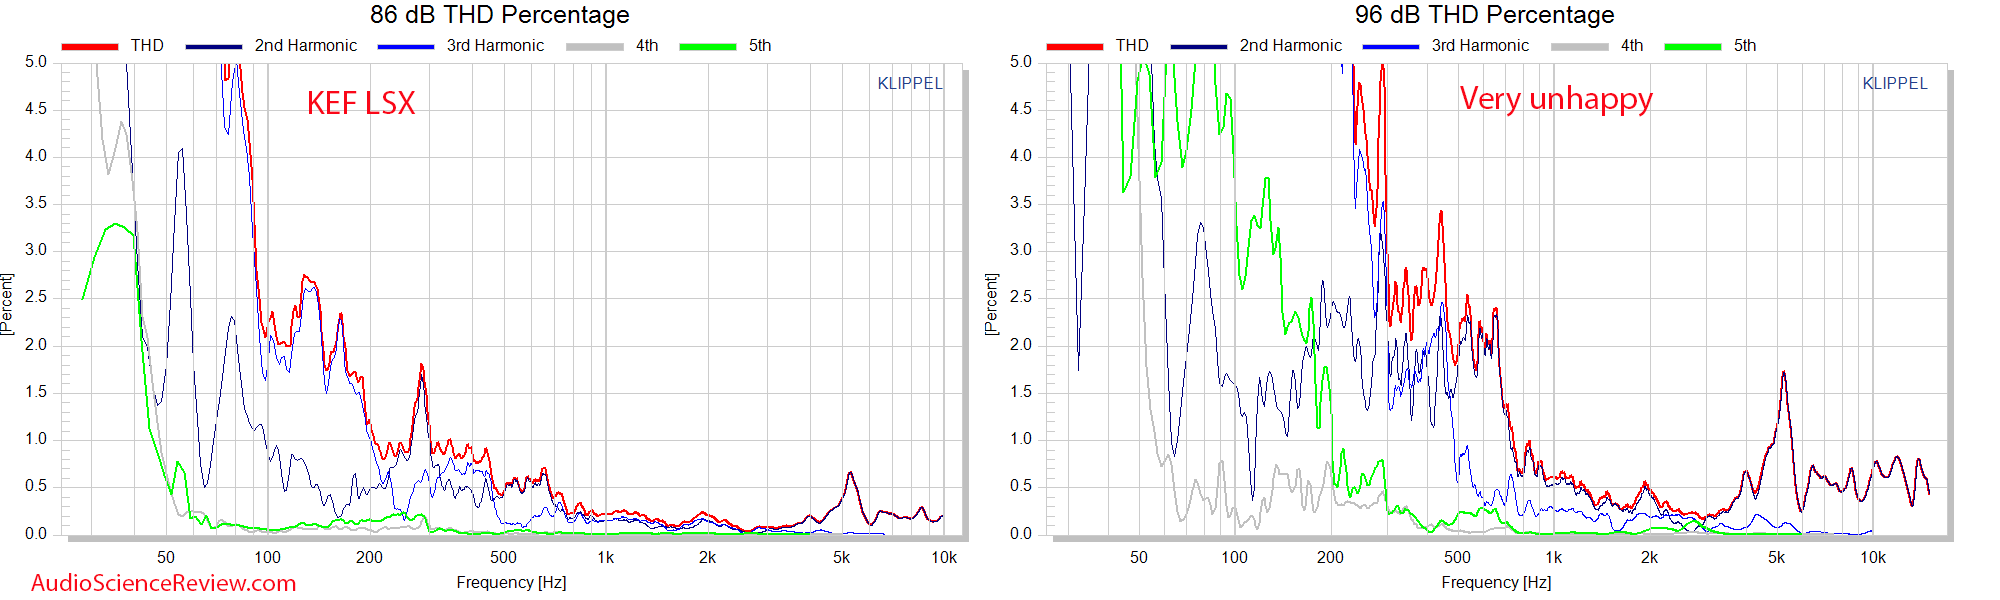 KEF LSX THDpercentage distortion vs Frequency Response Measurements Wireless Powered Speakers.png